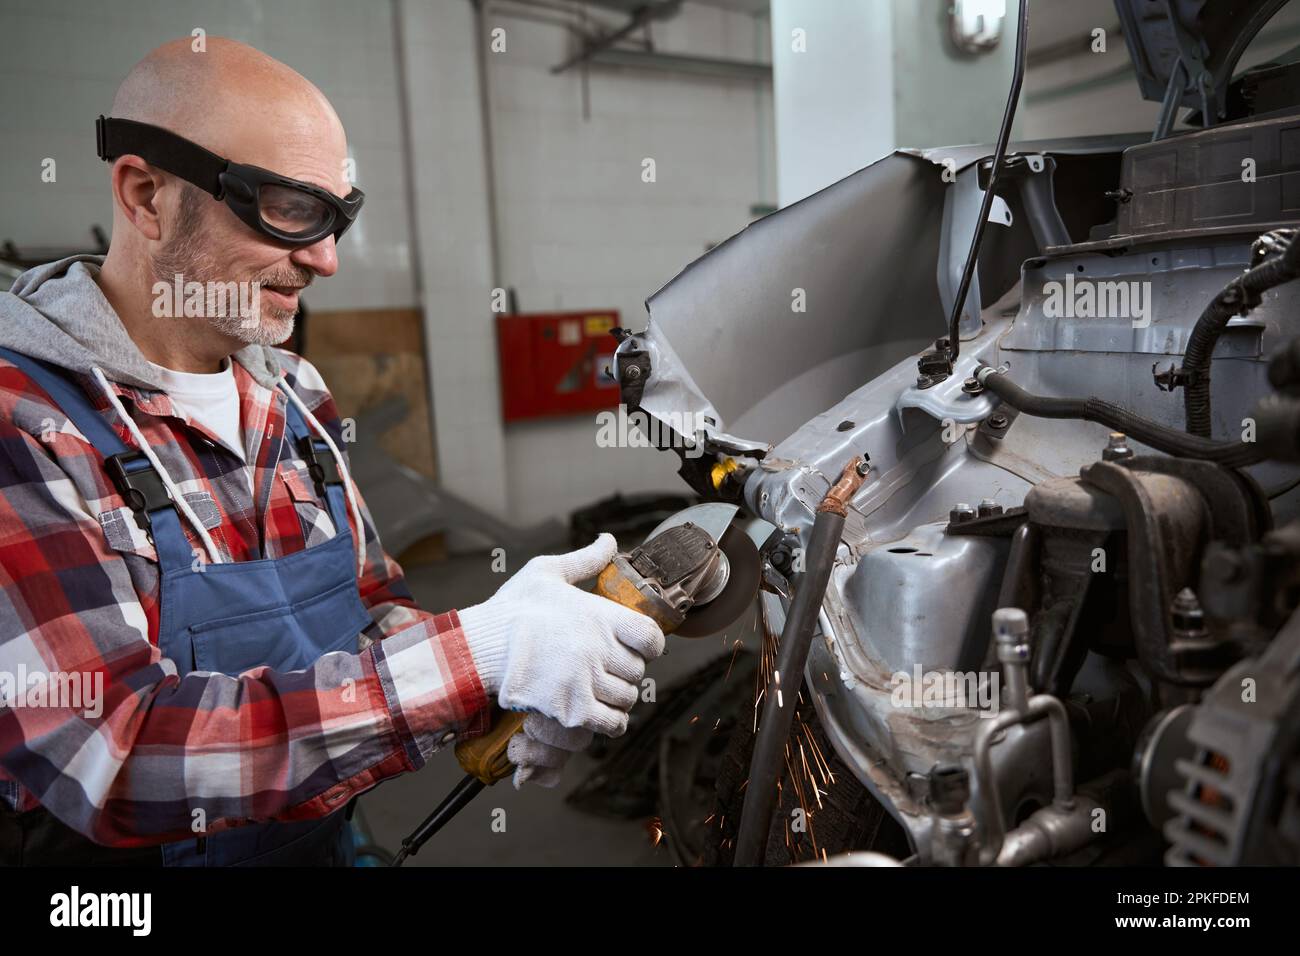 Auto mechanic in goggles uses pneumatic cutter Stock Photo